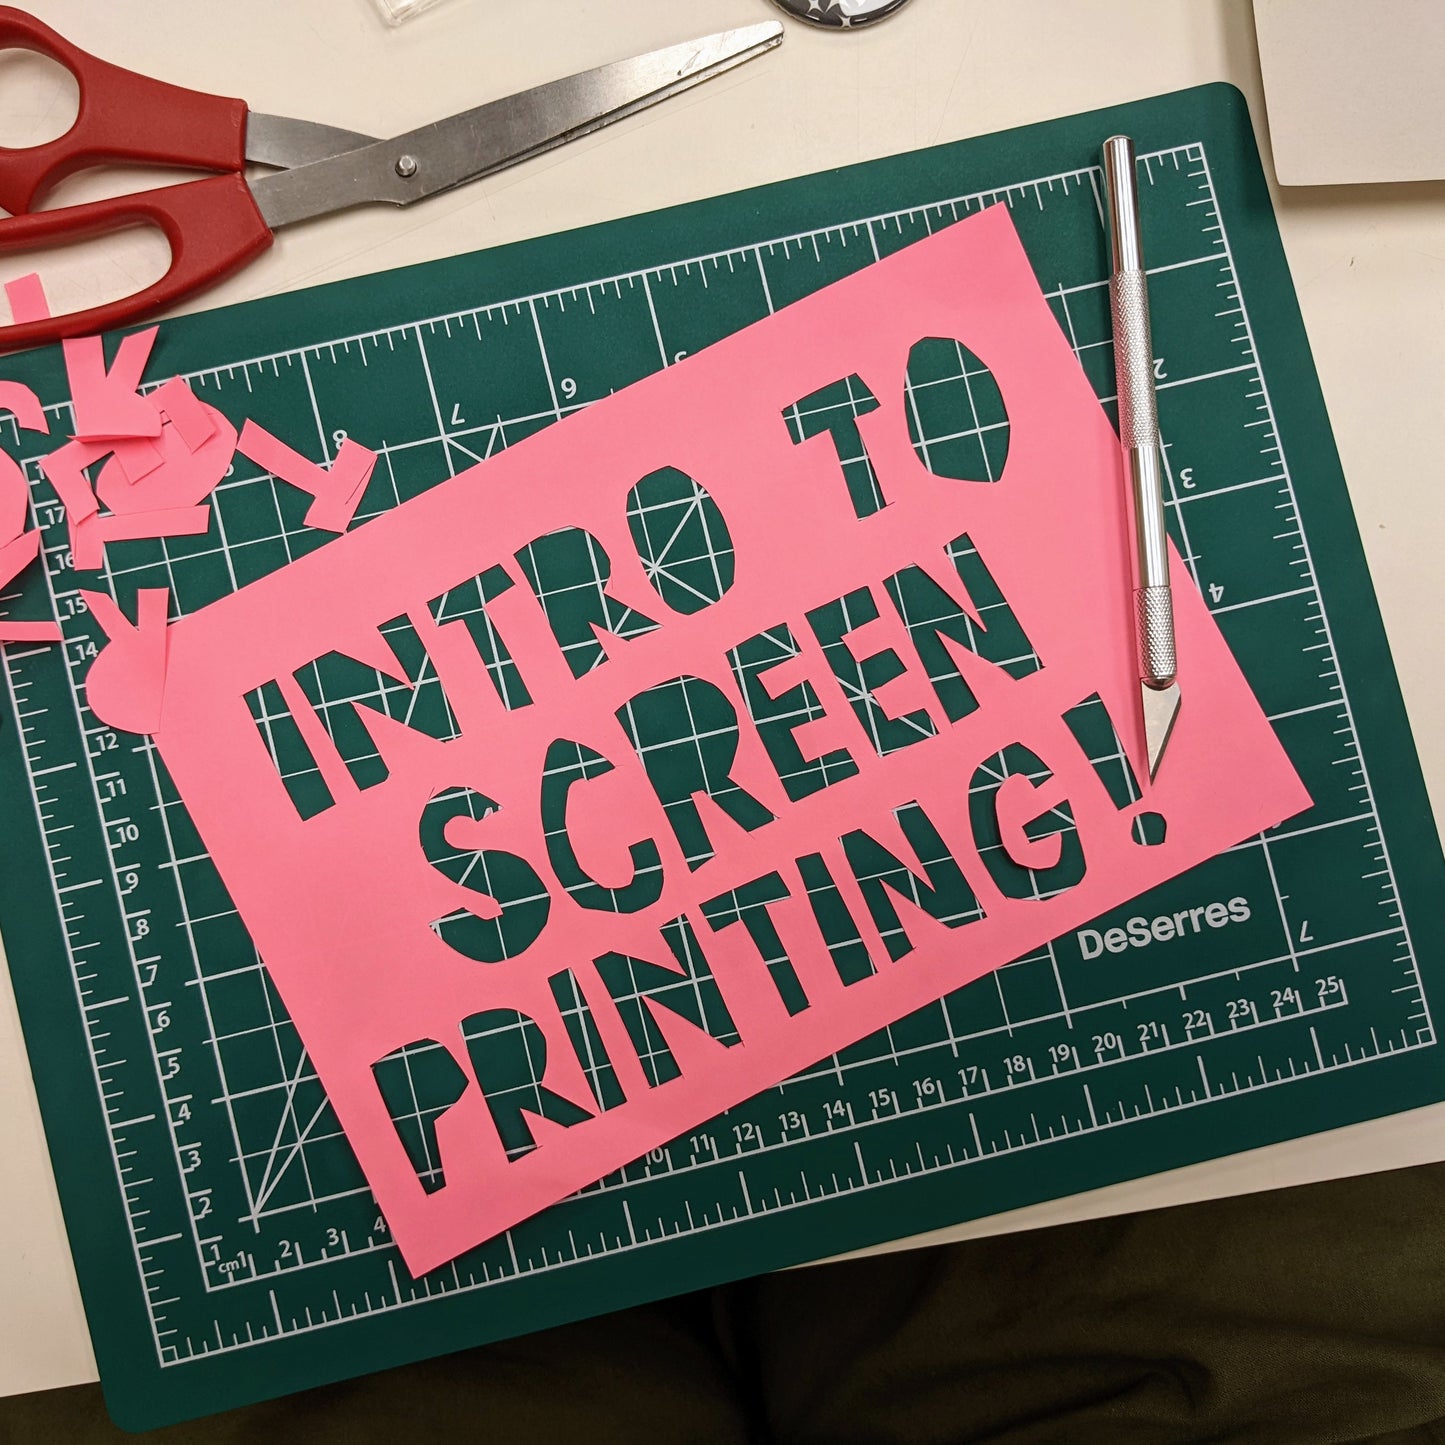 Intro to Screen Printing